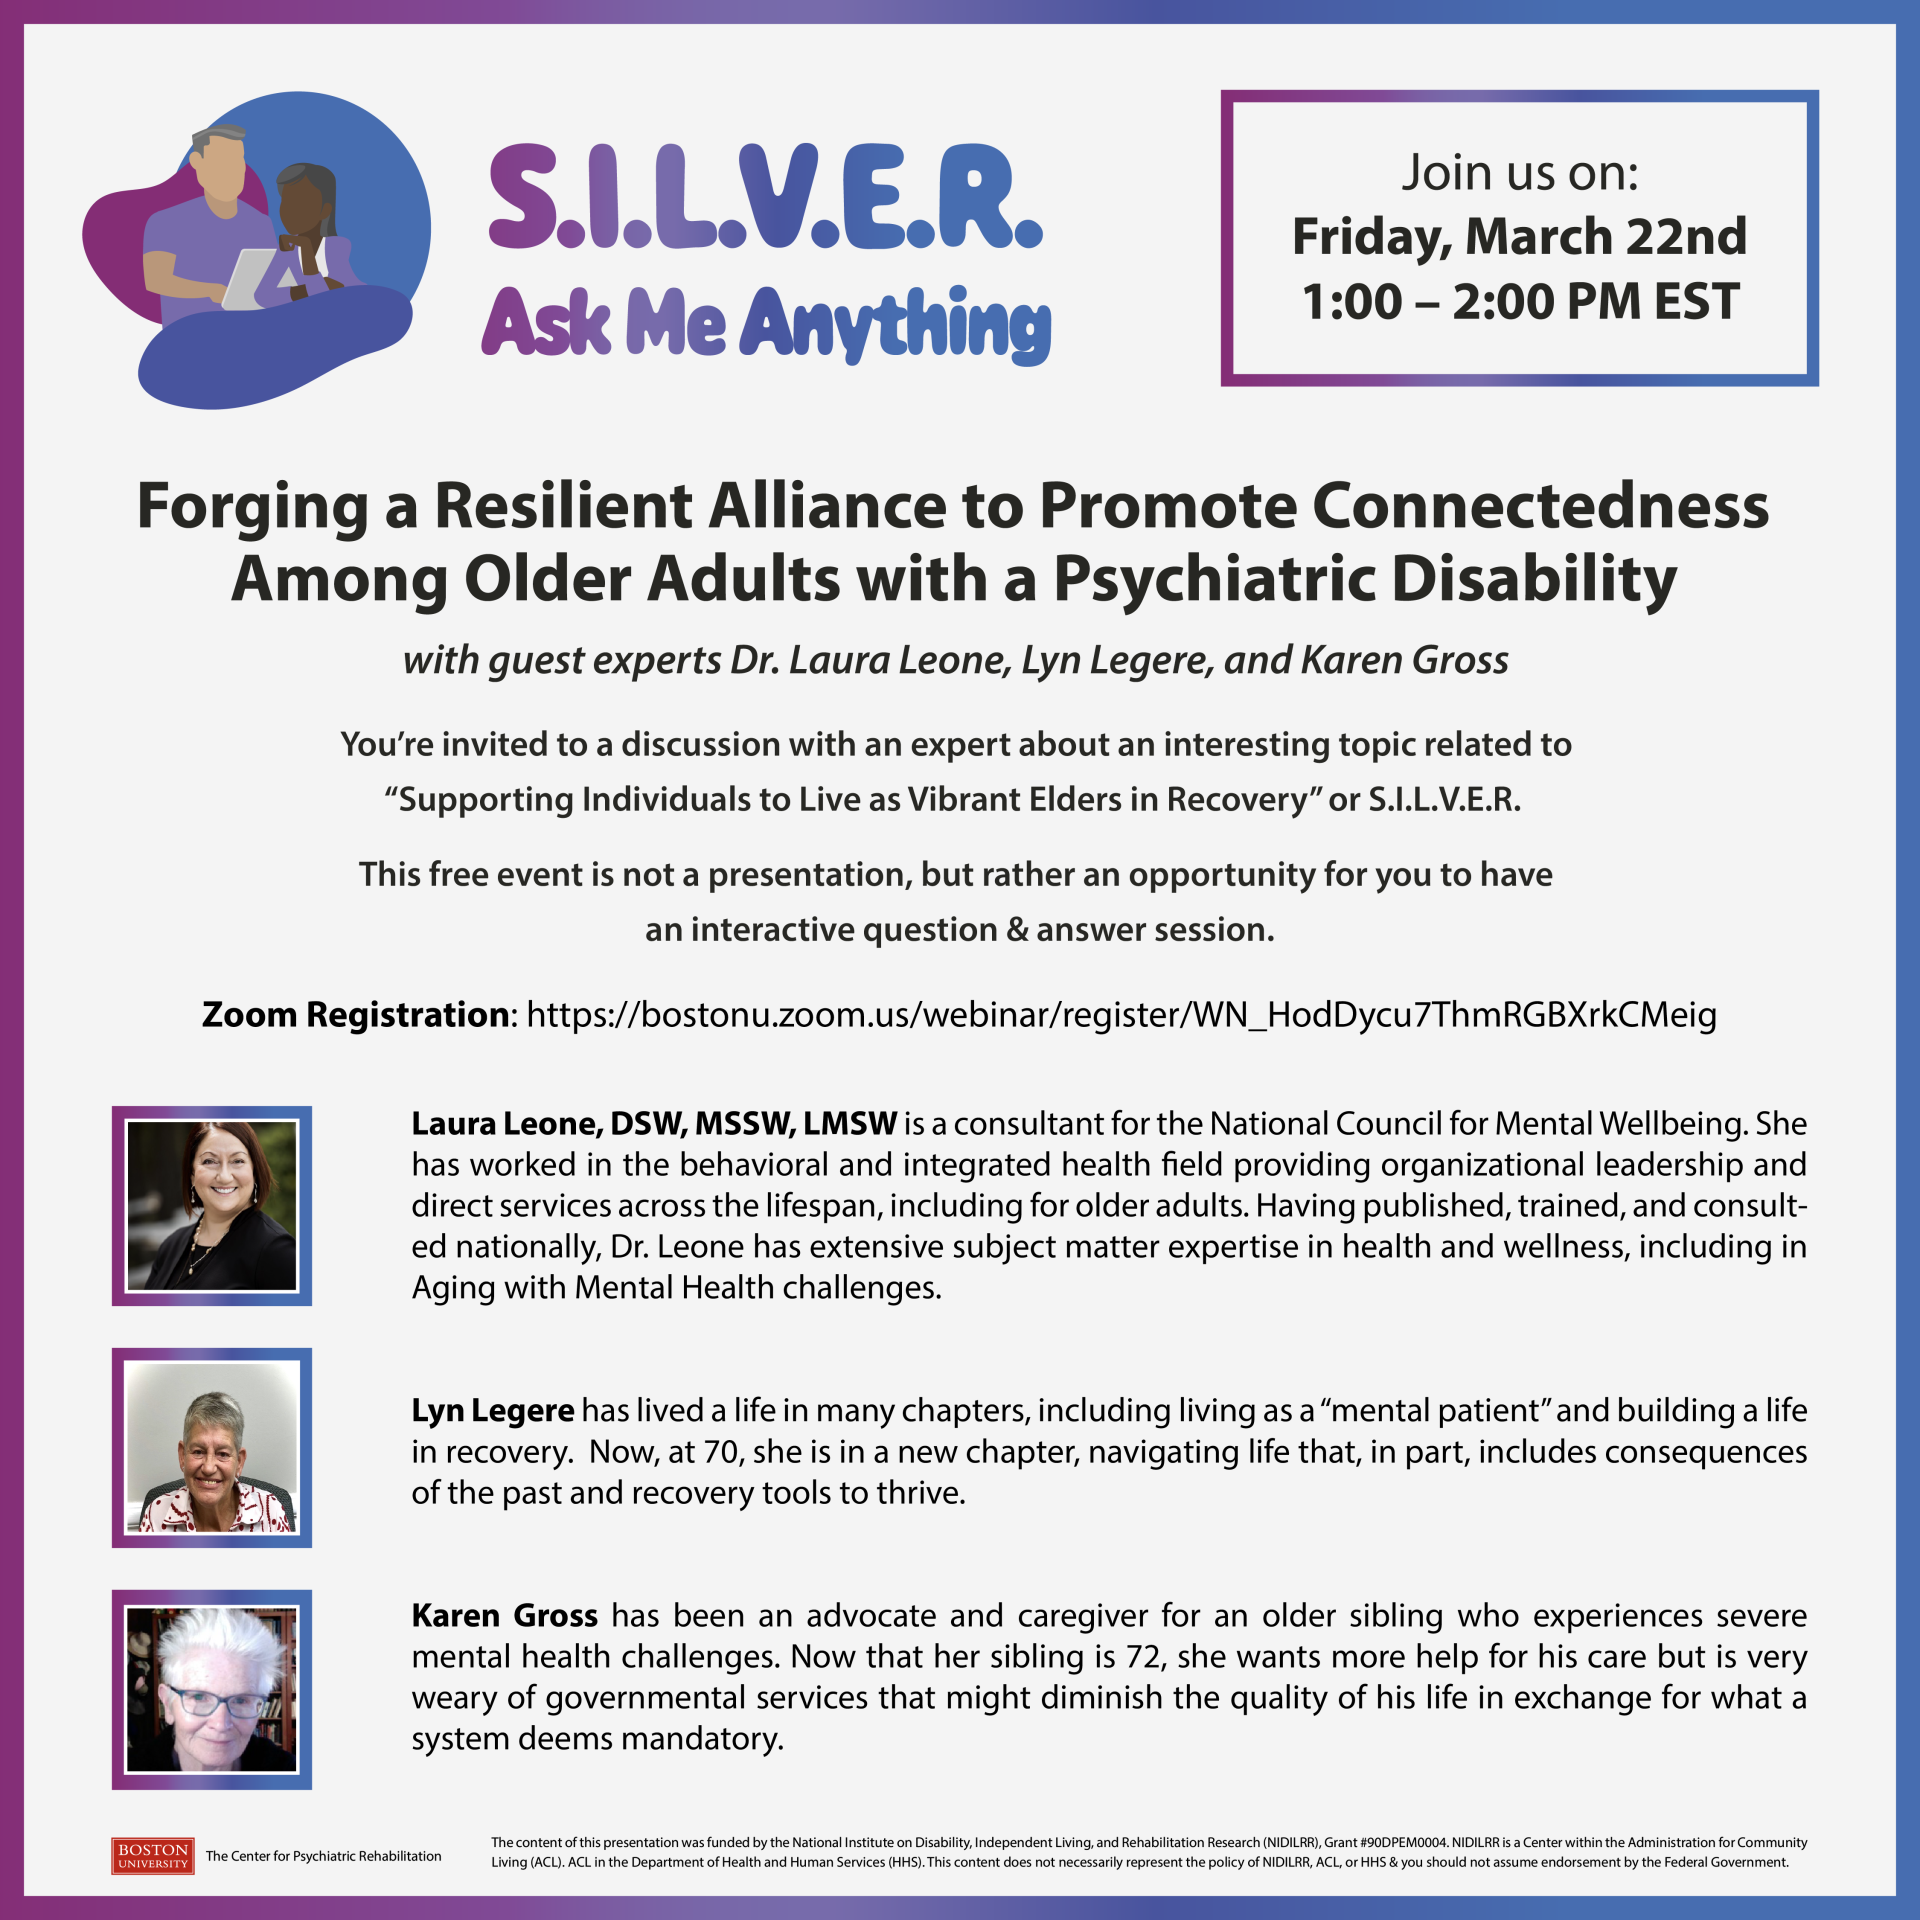 S.I.L.V.E.R. Ask Me Anything. Join us on: Friday, March 22nd, 1:00 – 2:00 PM EST. Forging a Resilient Alliance to Promote Connectedness Among Older Adults with a Psychiatric Disability with guest experts Dr. Laura Leone, Lyn Legere, and Karen Gross. You’re invited to a discussion with an expert about an interesting topic related to 'Supporting Individuals to Live as Vibrant Elders in Recovery' or S.I.L.V.E.R. This free event is not a presentation, but rather an opportunity for you to have an interactive question & answer session. Zoom Registration: [URL provided]. Laura Leone, DSW, MSSW, LMSW is a consultant for the National Council for Mental Wellbeing. She has worked in the behavioral and integrated health field providing organizational leadership and direct services across the lifespan, including for older adults. Having published, trained, and consulted nationally, Dr. Leone has extensive subject matter expertise in health and wellness, including in Aging with Mental Health challenges. Lyn Legere has lived a life in many chapters, including living as a 'mental patient' and building a life in recovery. Now, at 70, she is in a new chapter, navigating life that, in part, includes consequences of the past and recovery tools to thrive. Karen Gross has been an advocate and caregiver for an older sibling who experiences severe mental health challenges. Now that her sibling is 72, she wants more help for his care but is very weary of governmental services that might diminish the quality of his life in exchange for what a system deems mandatory. The content of this presentation was funded by the National Institute on Disability, Independent Living, and Rehabilitation Research (NIDILRR), ACL, HHS, and the Department of Health and Human Services (HHS). This content does not necessarily represent the policy of NIDILRR, ACL, or HHS, and you should not assume endorsement by the Federal Government.